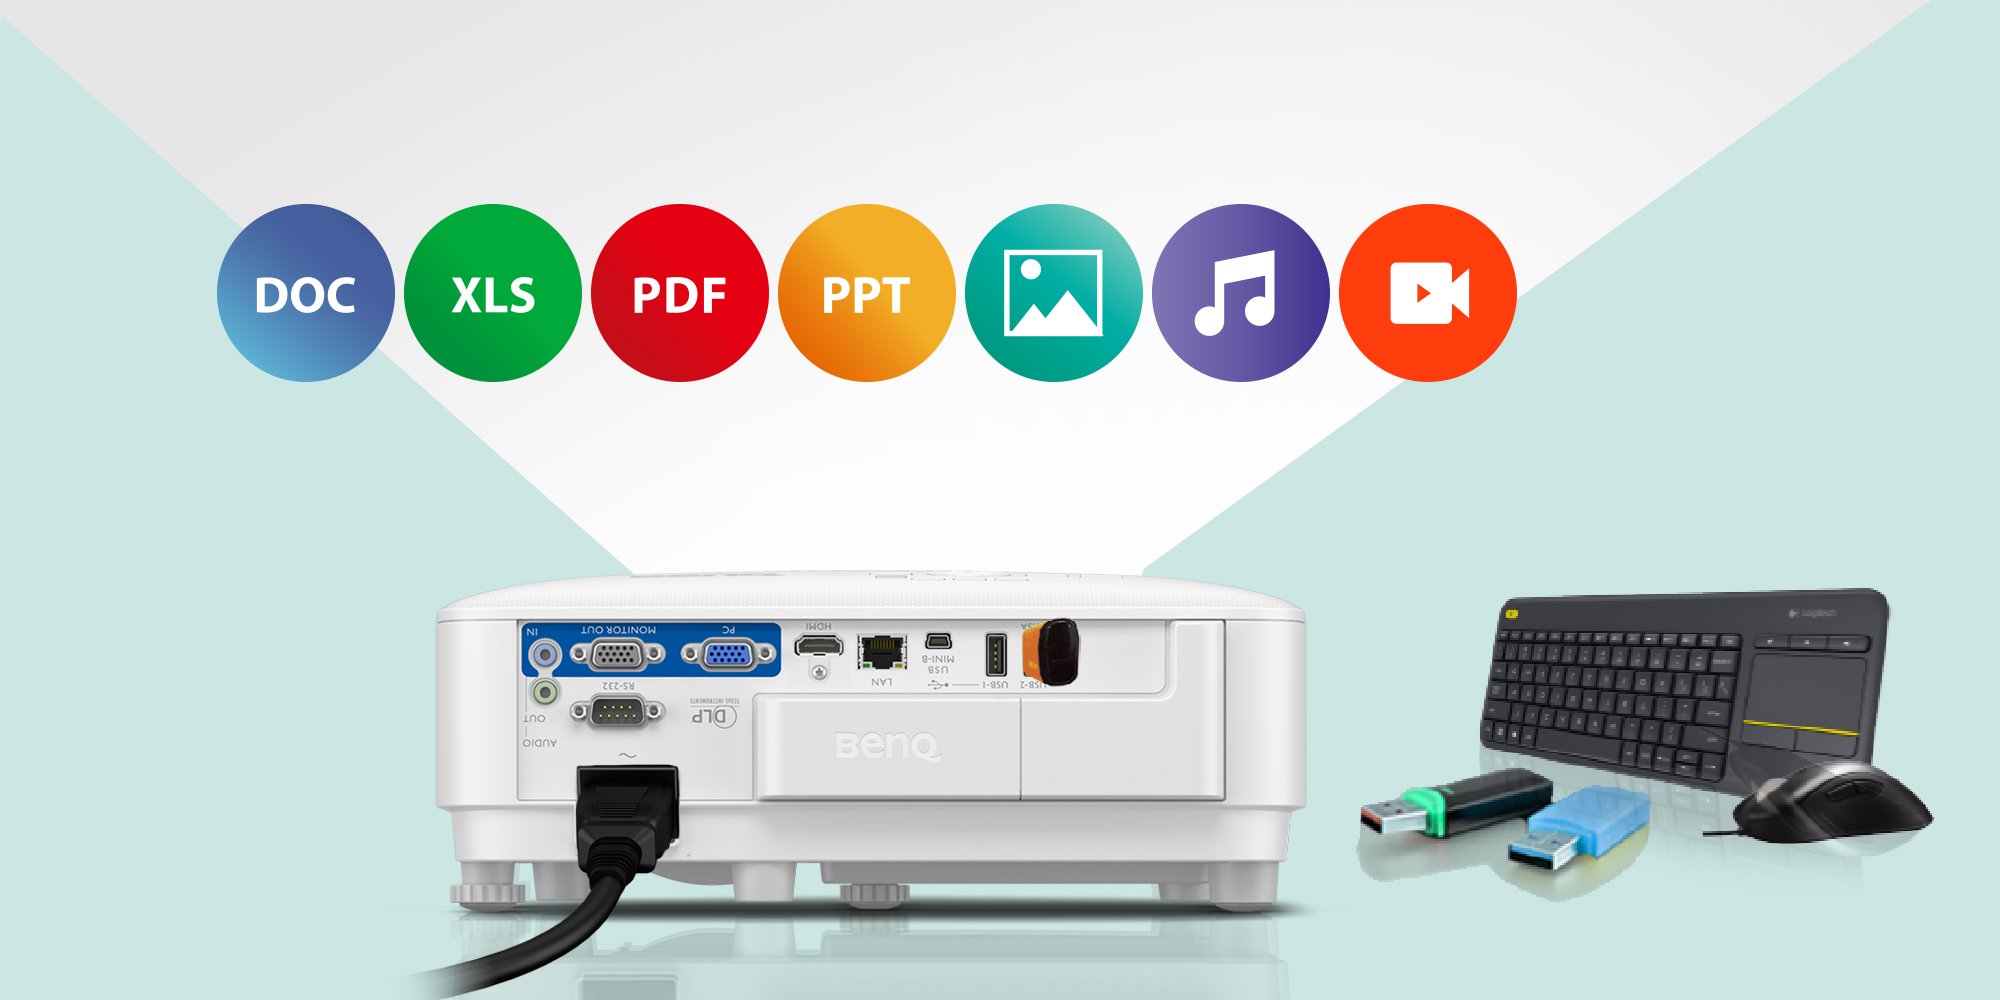 EW800ST USB supporting a wide range of file formats including JPEG, PDF, Microsoft Word, Excel, PowerPoint files